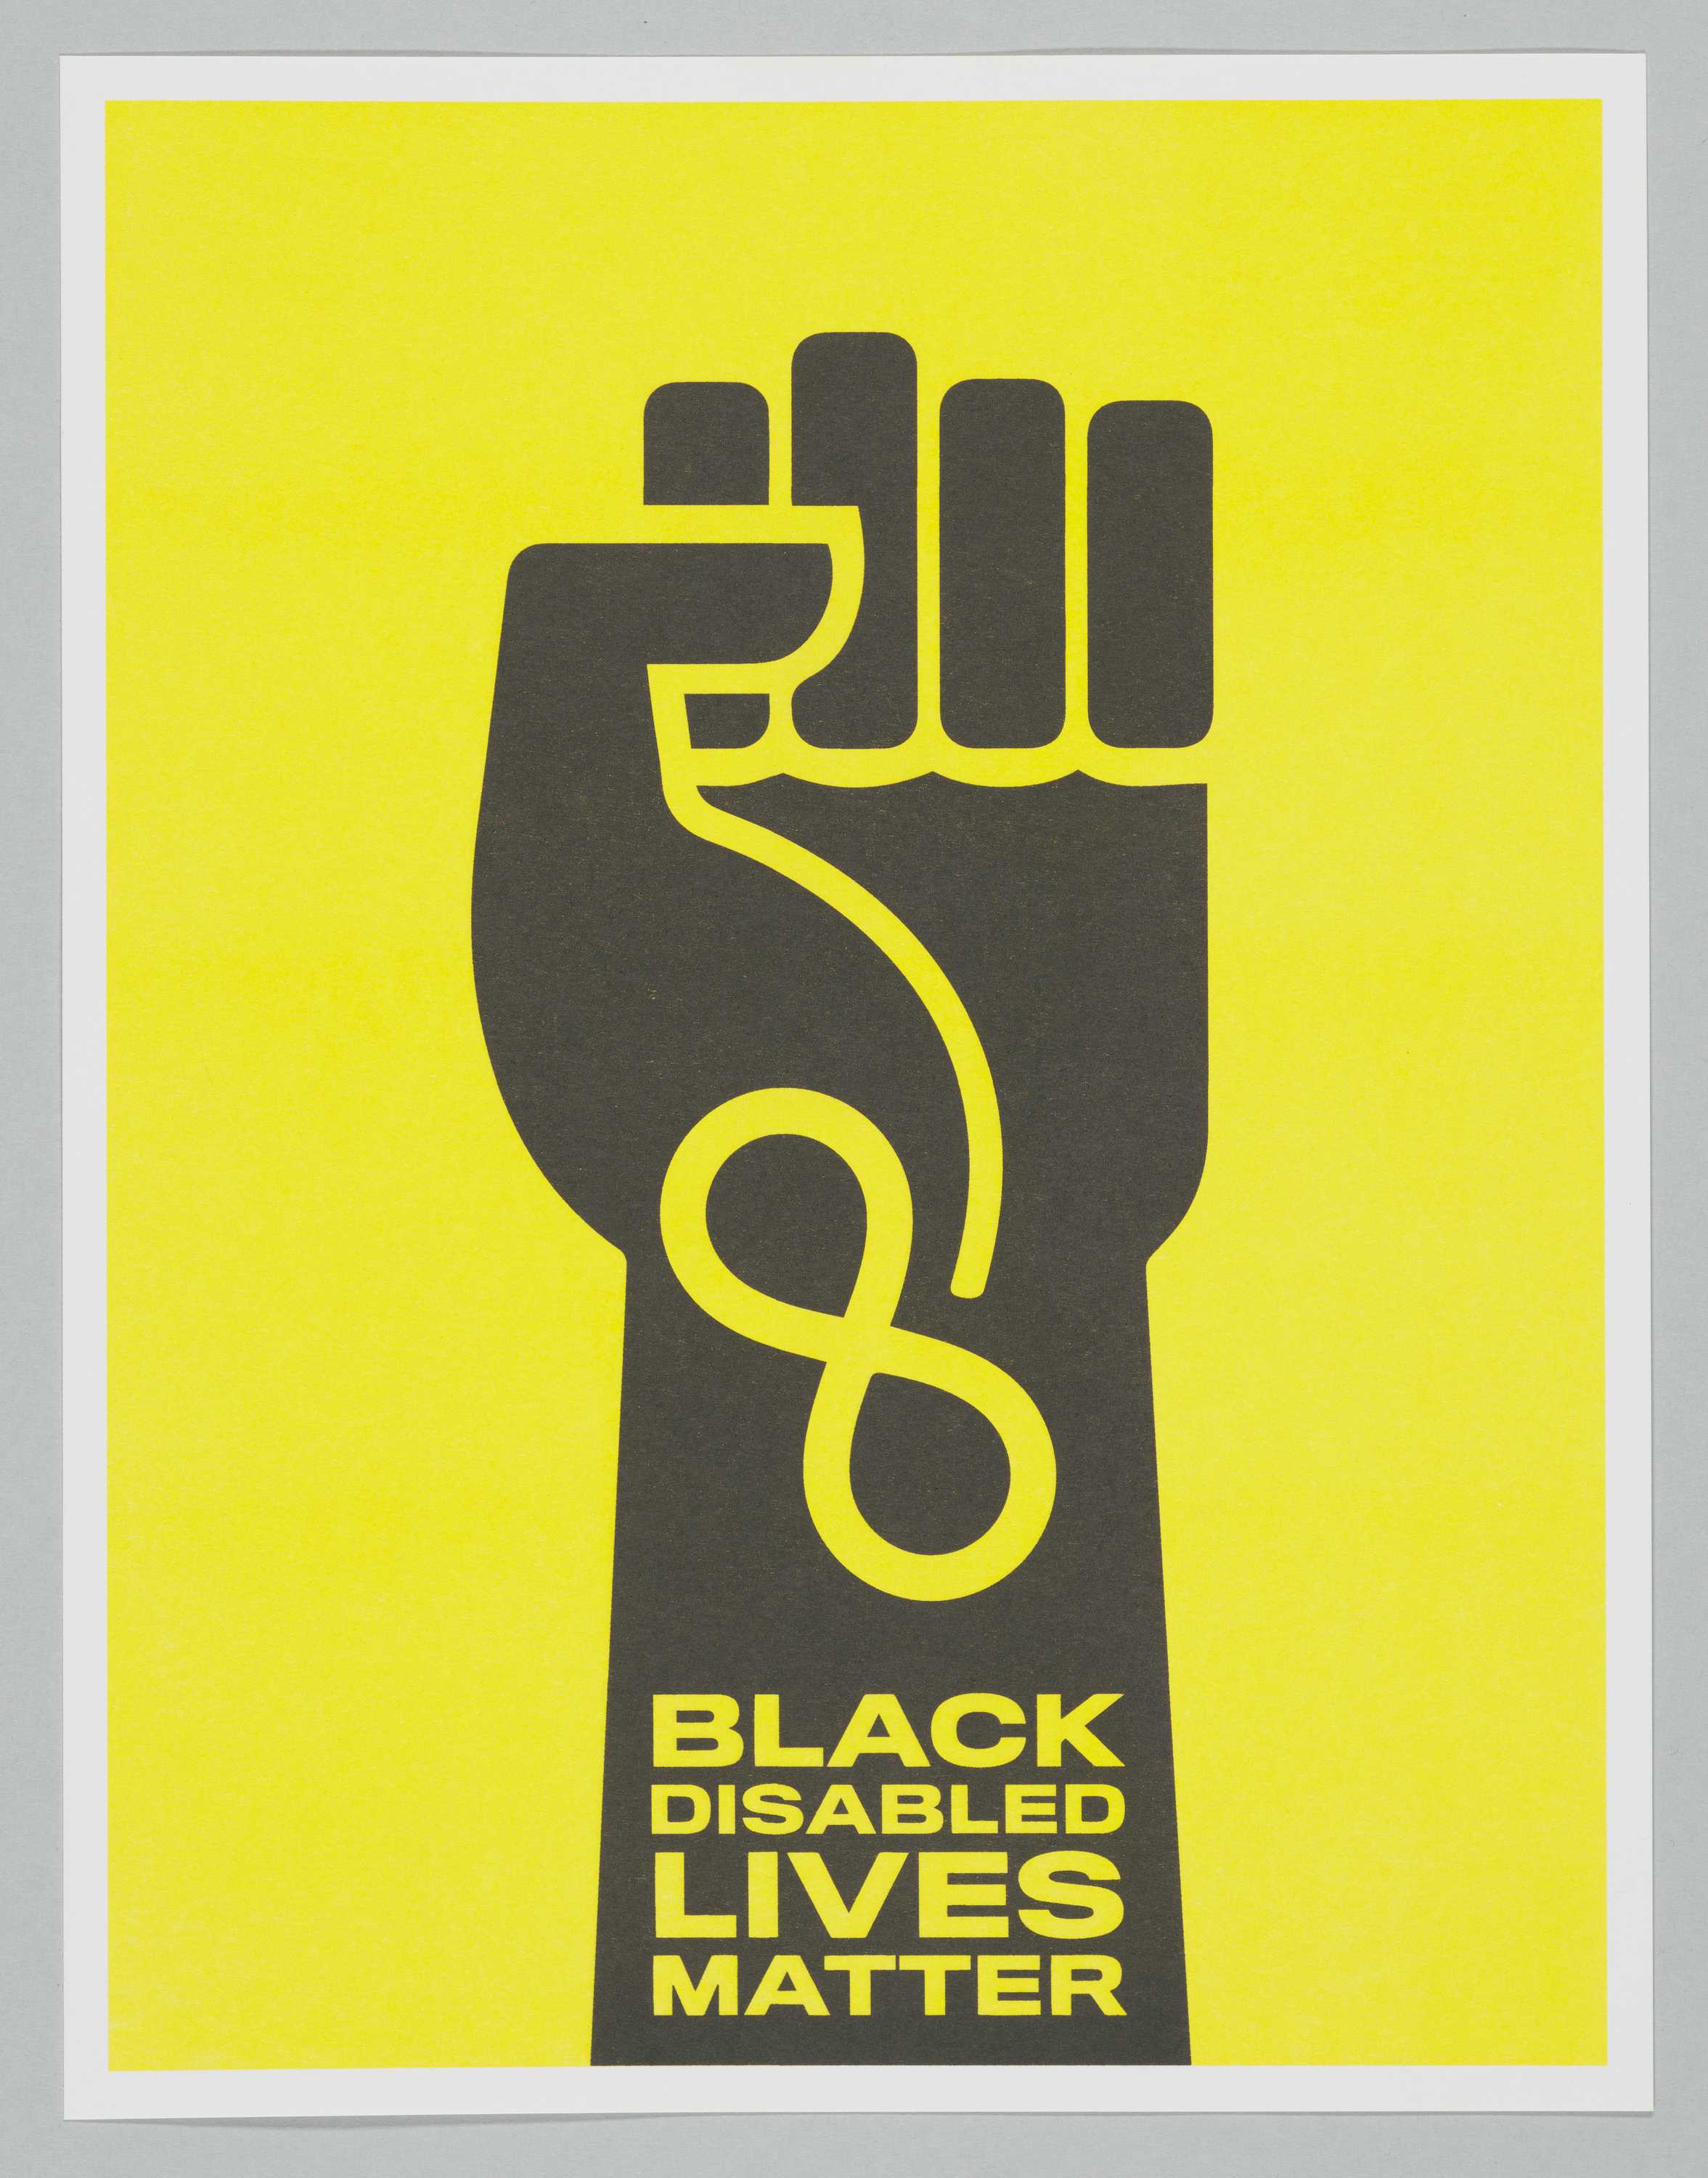 Poster with bright yellow backround and black fist with "BLACK DISABLED LIVES MATTER' written on the base of the fist.